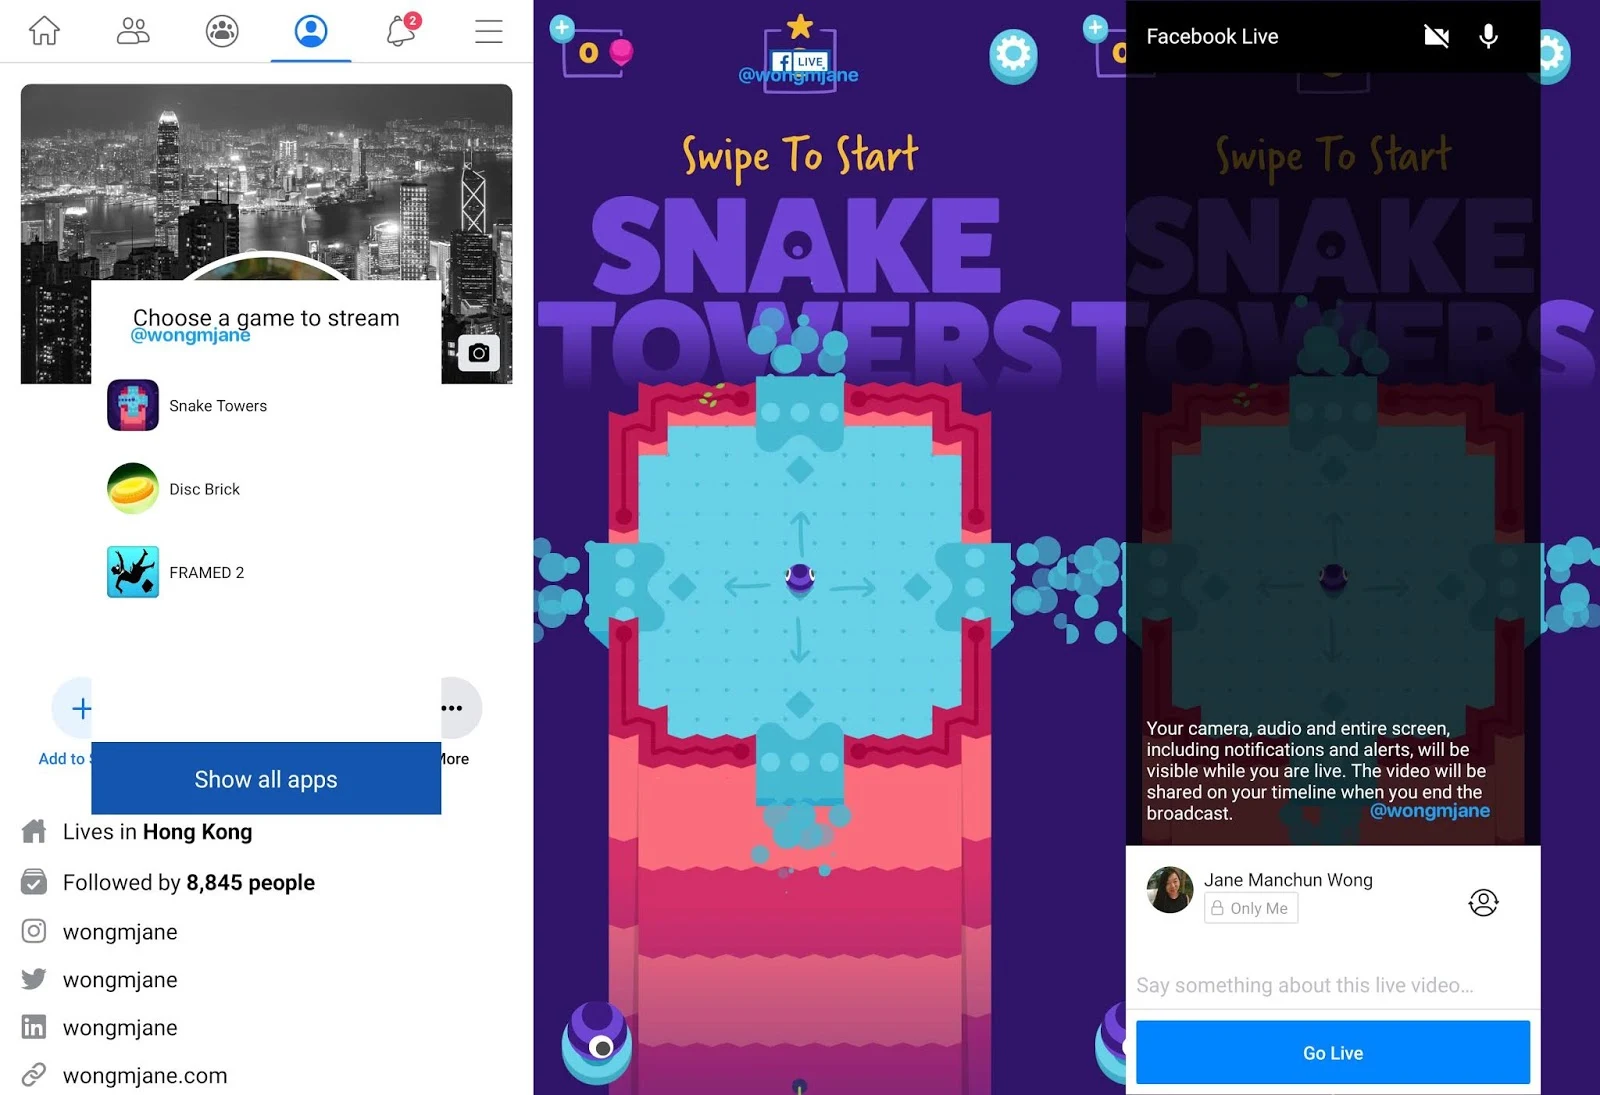 Facebook is working on streaming Android games